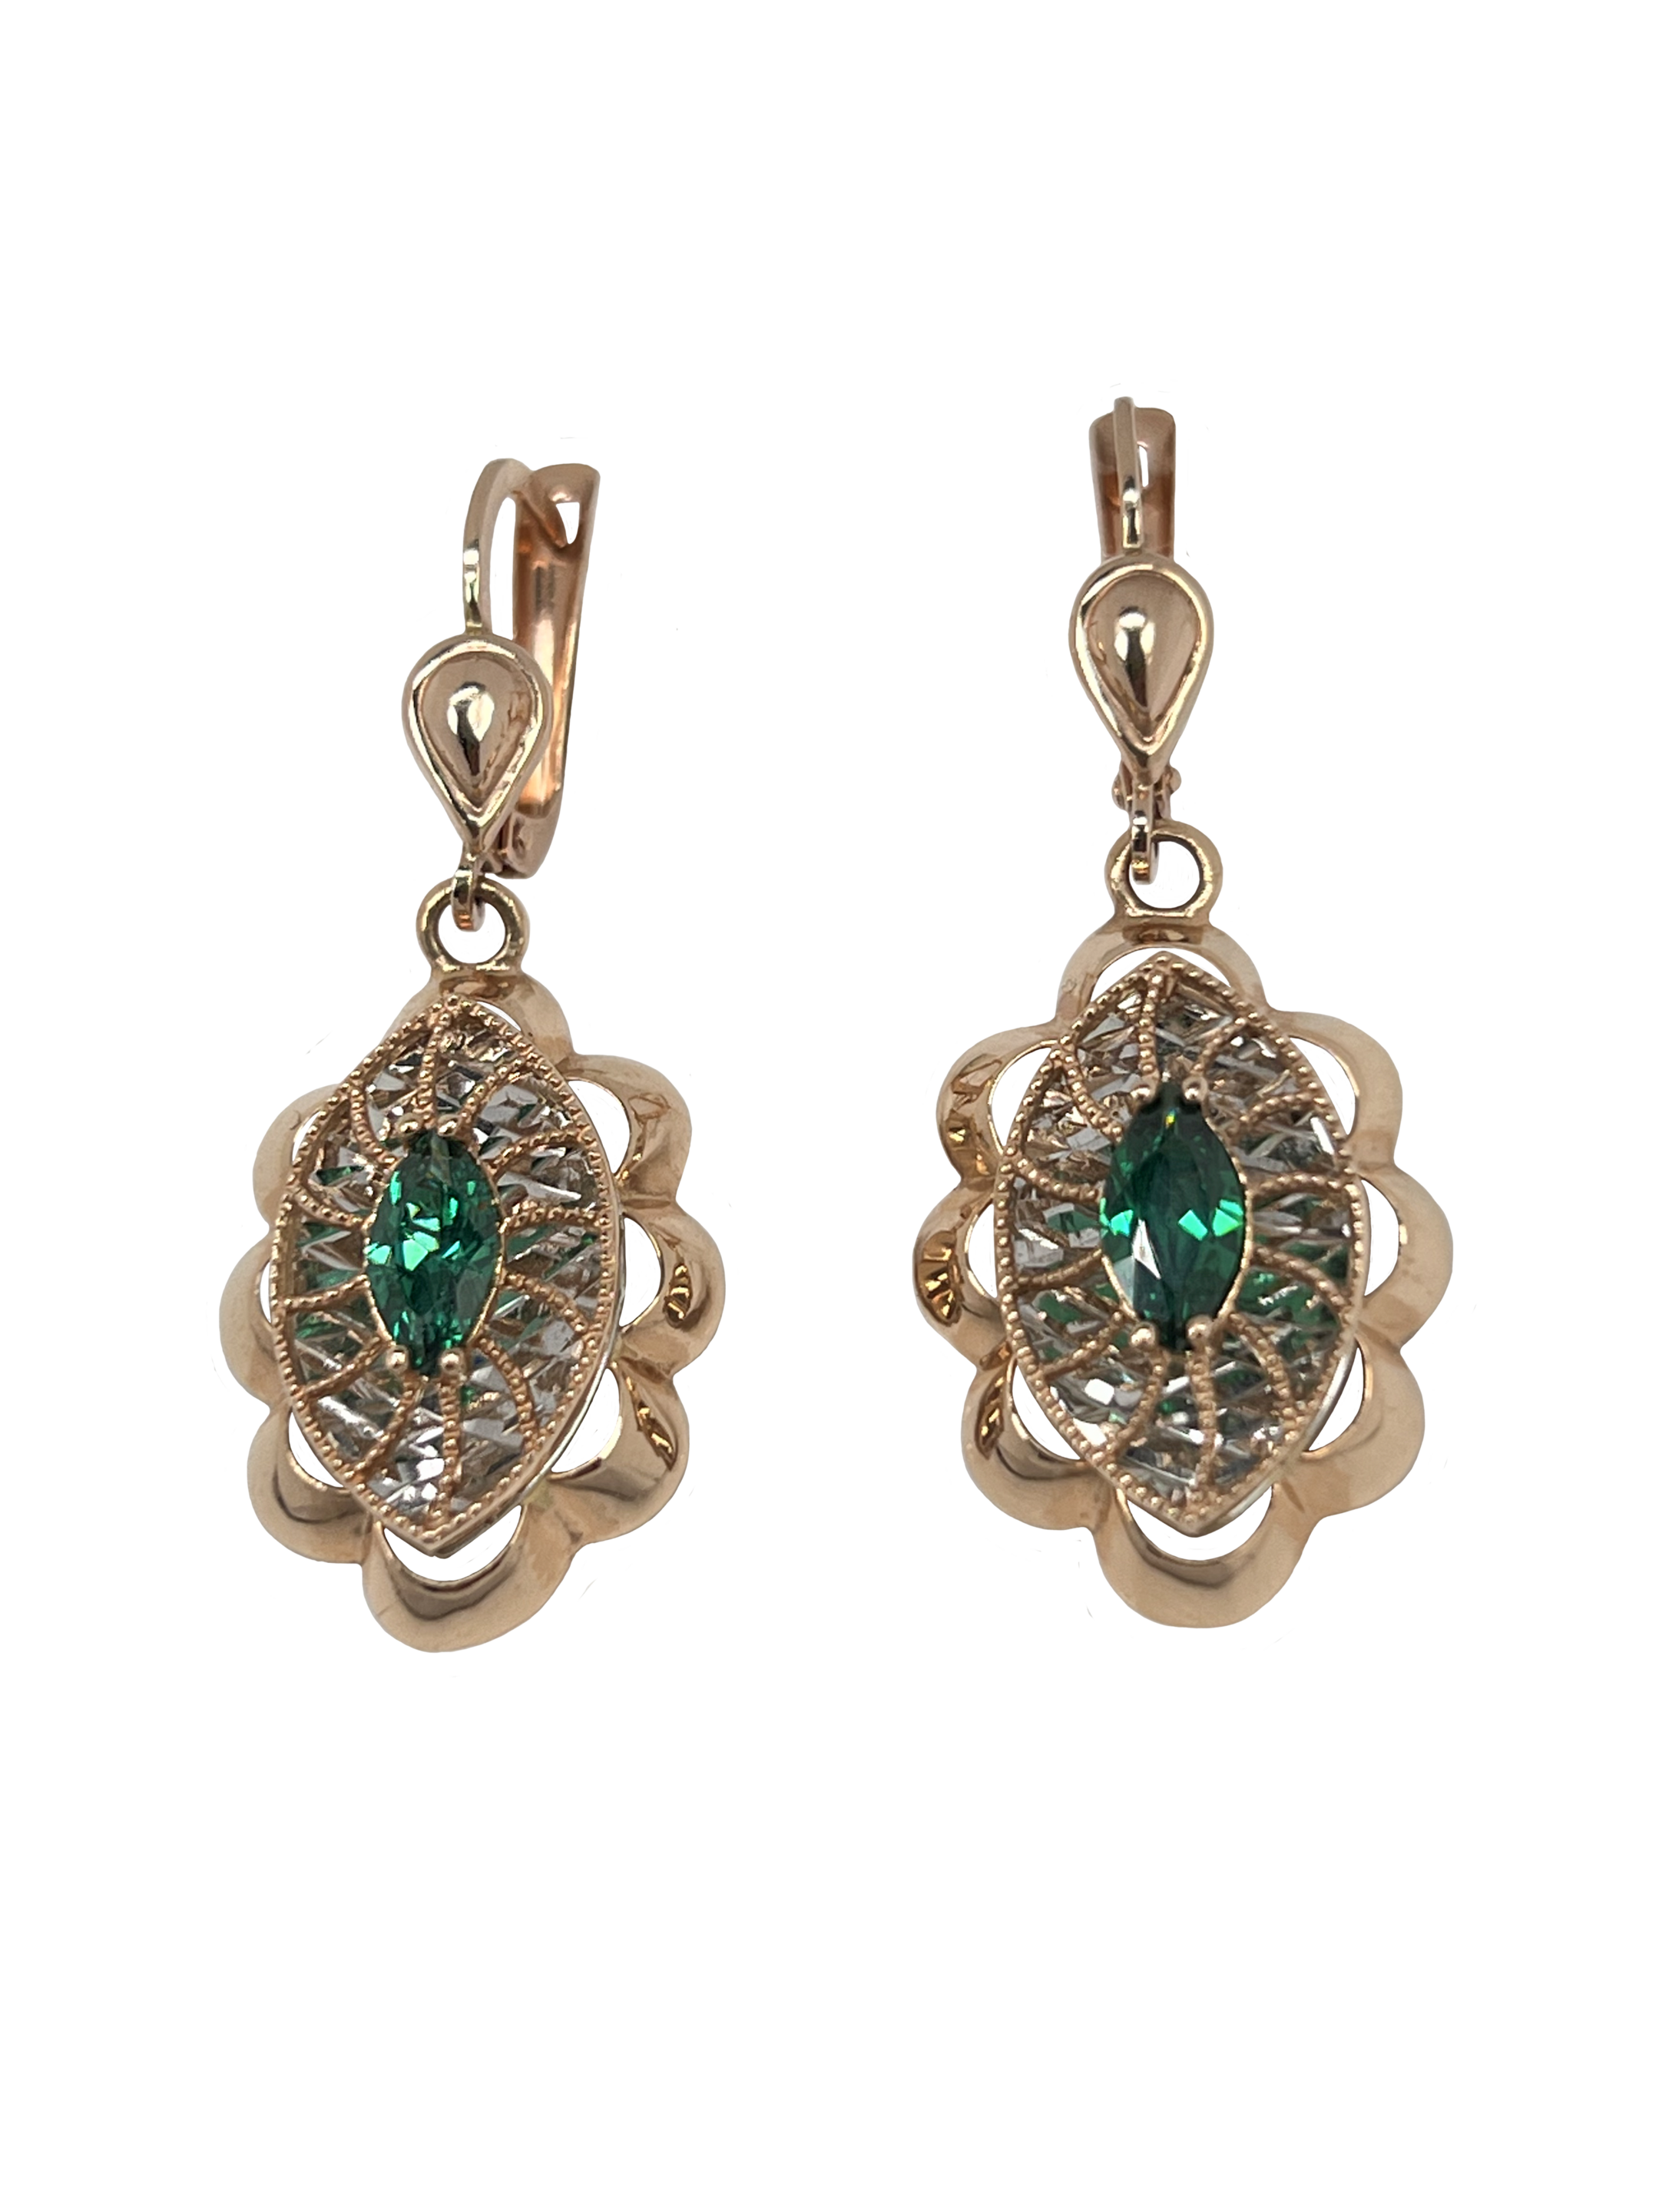 Gold earrings made of rose gold with green zircons